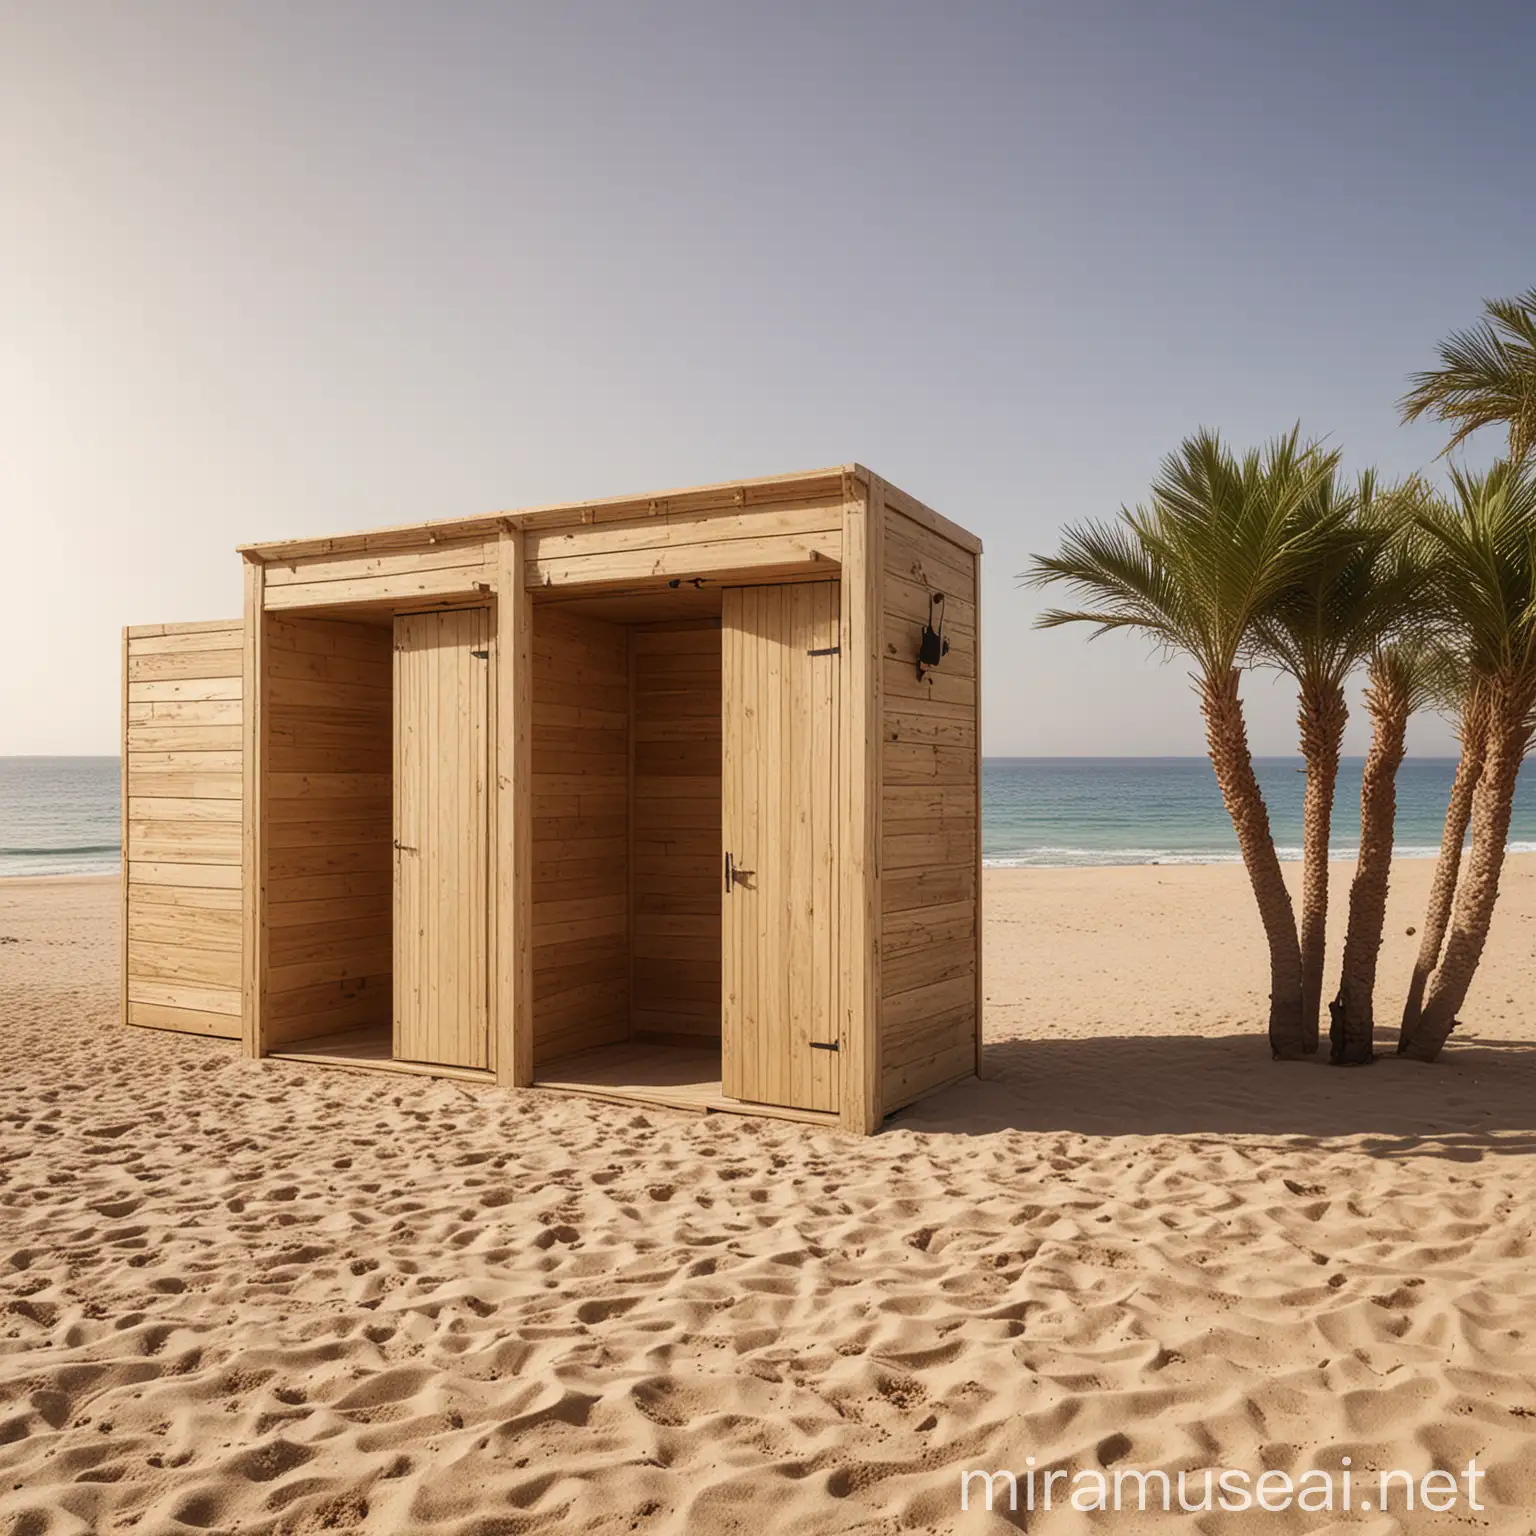 generate and image of  3 wooden changing rooms on the sand by a beach in Egypt  in the morning , and design the changing rooms to look aesthetically  pleasing, comfortable, and easily accessible. do not add any greenery 
